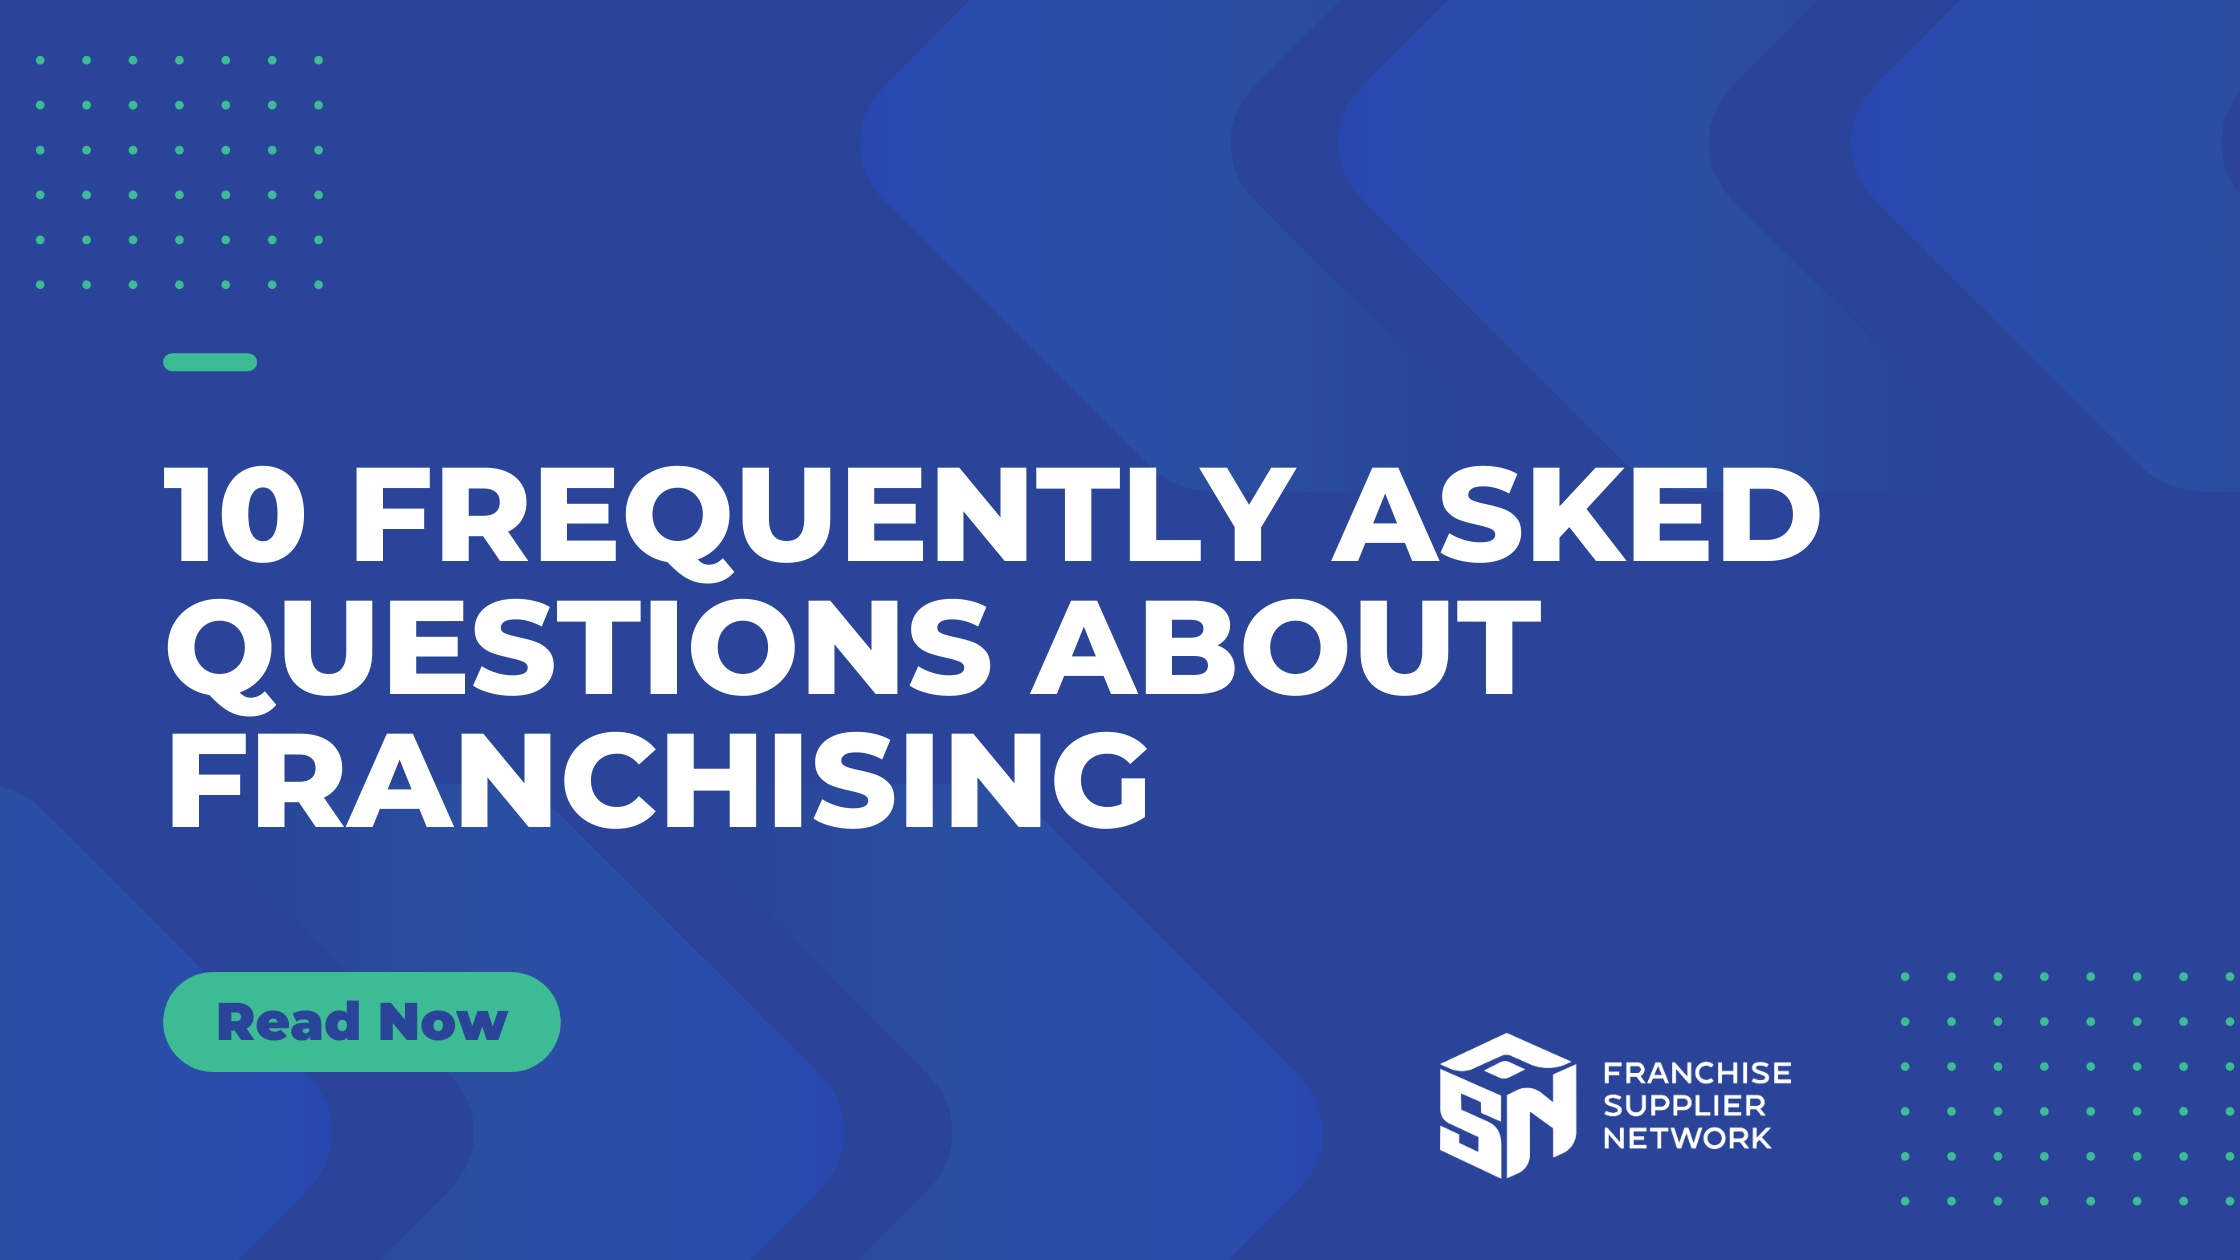 10 Frequently Asked Questions About Franchising